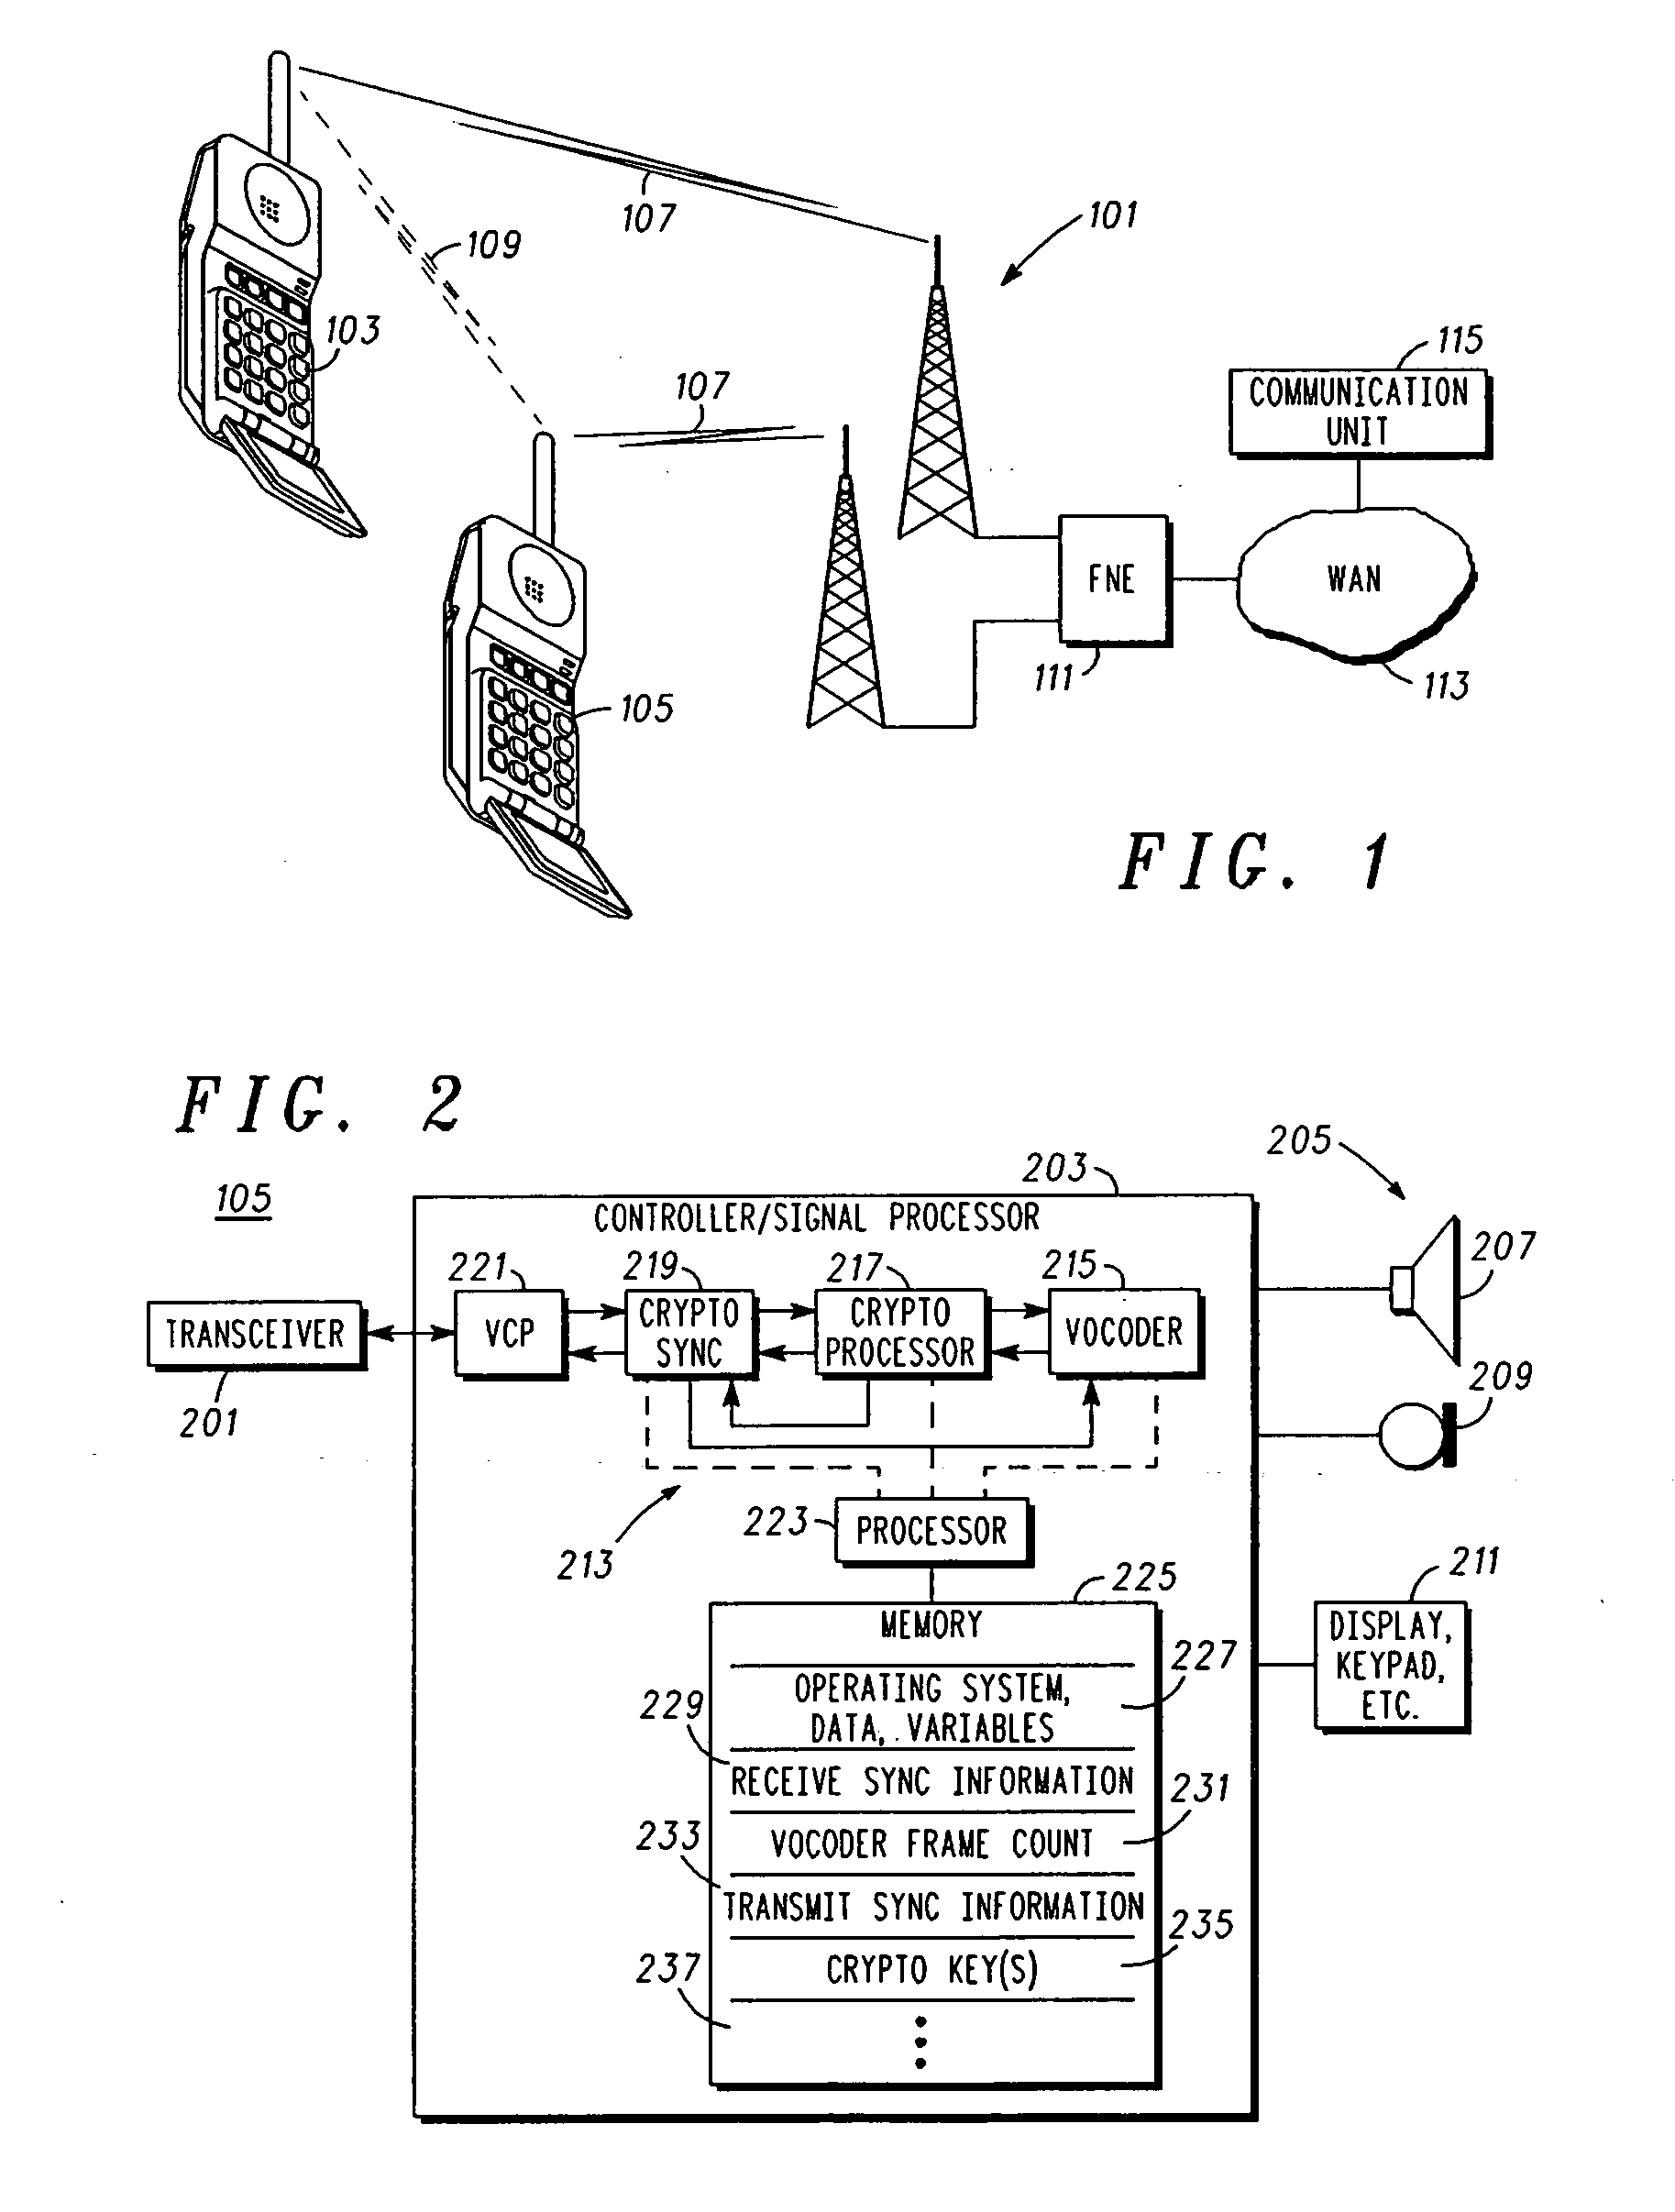 Method and apparatus for fast secure session establishment on half-duplex point-to-point voice cellular network channels